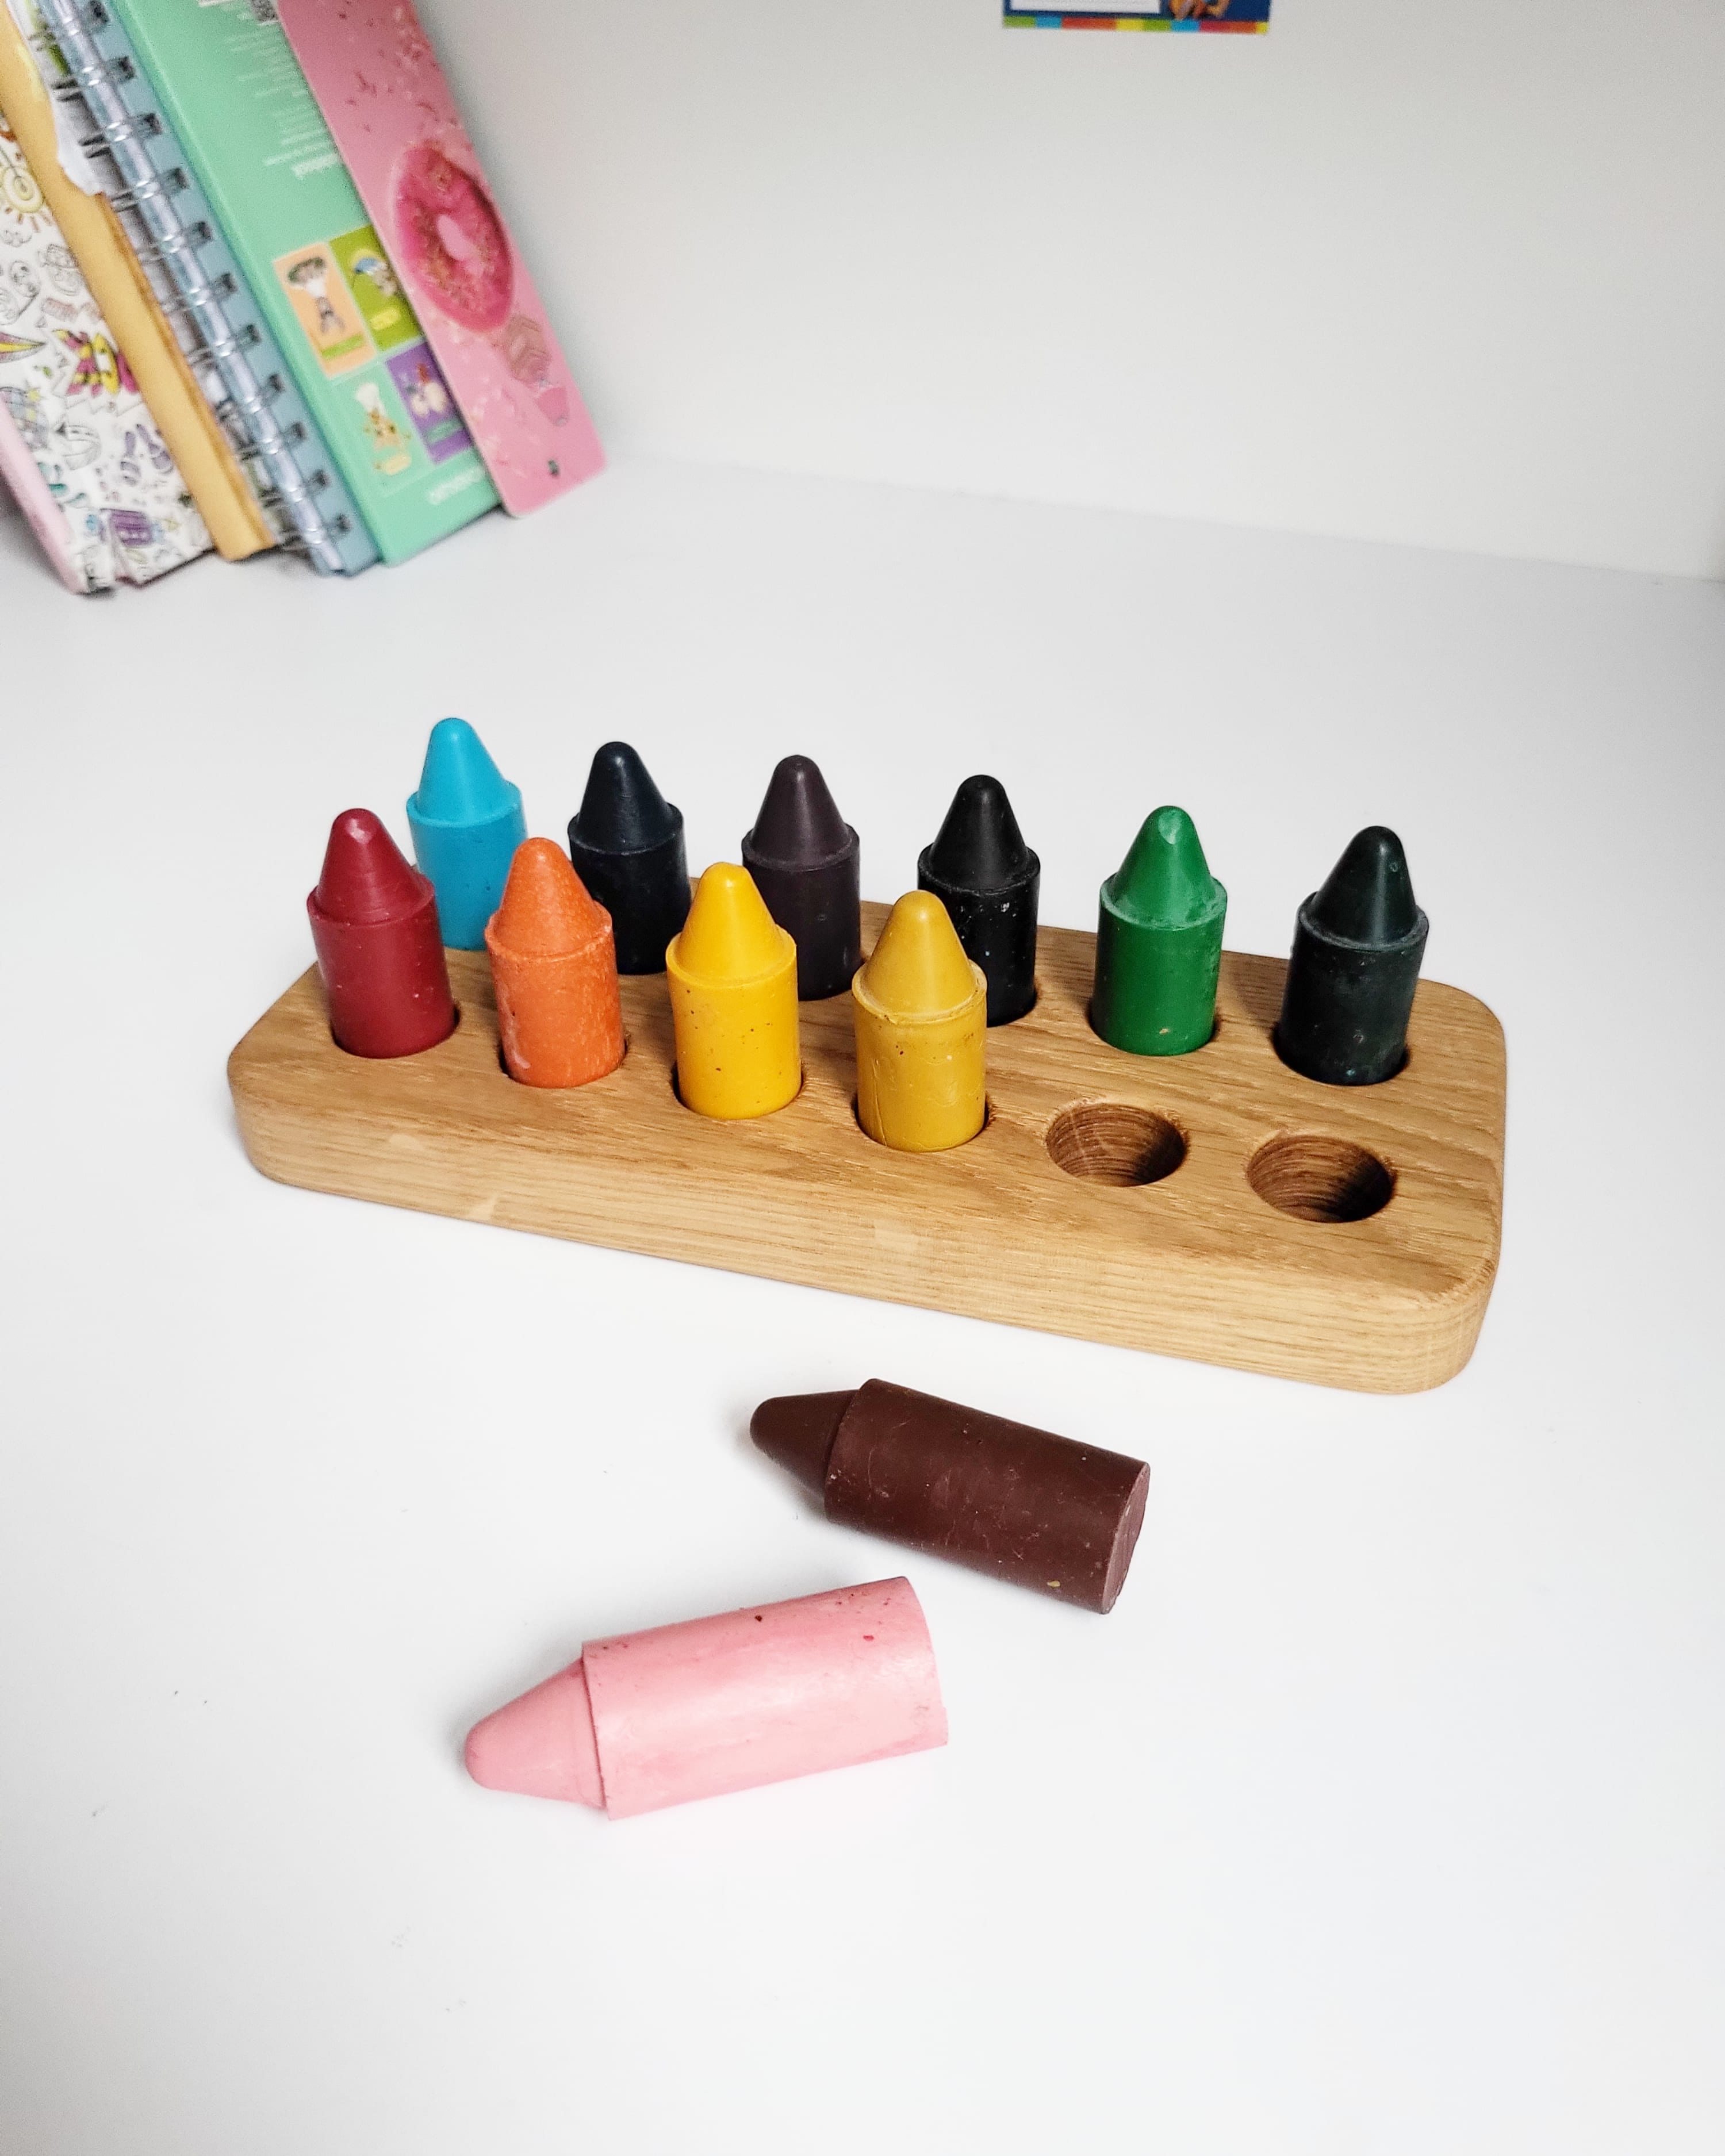 Crayon holder for 12 Honey Sticks crayons, without crayons